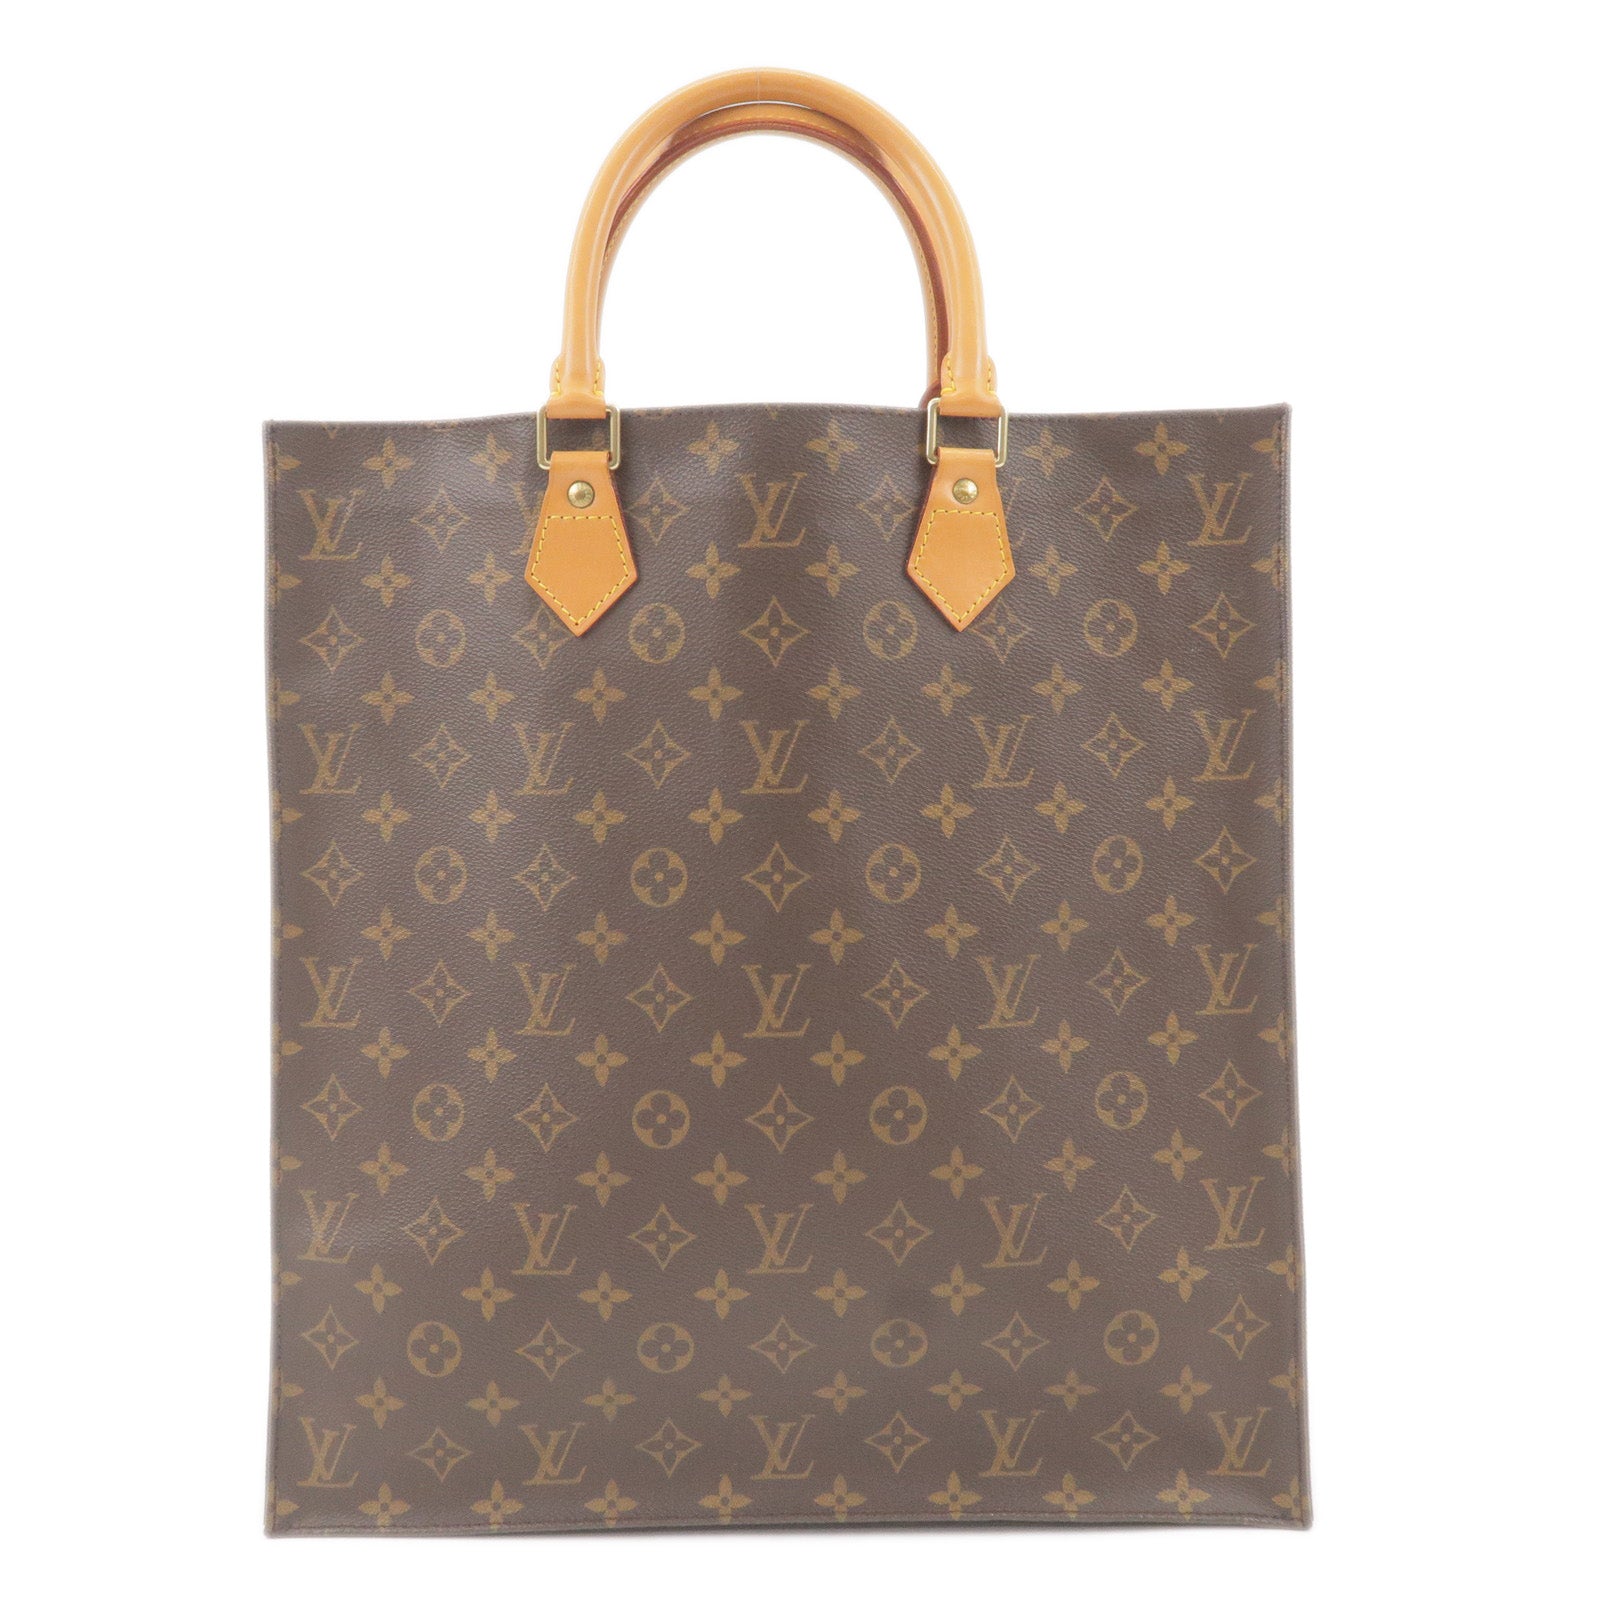 Vintage Louis Vuitton Green Epi Tote Bag in V Shaped Triangle. 